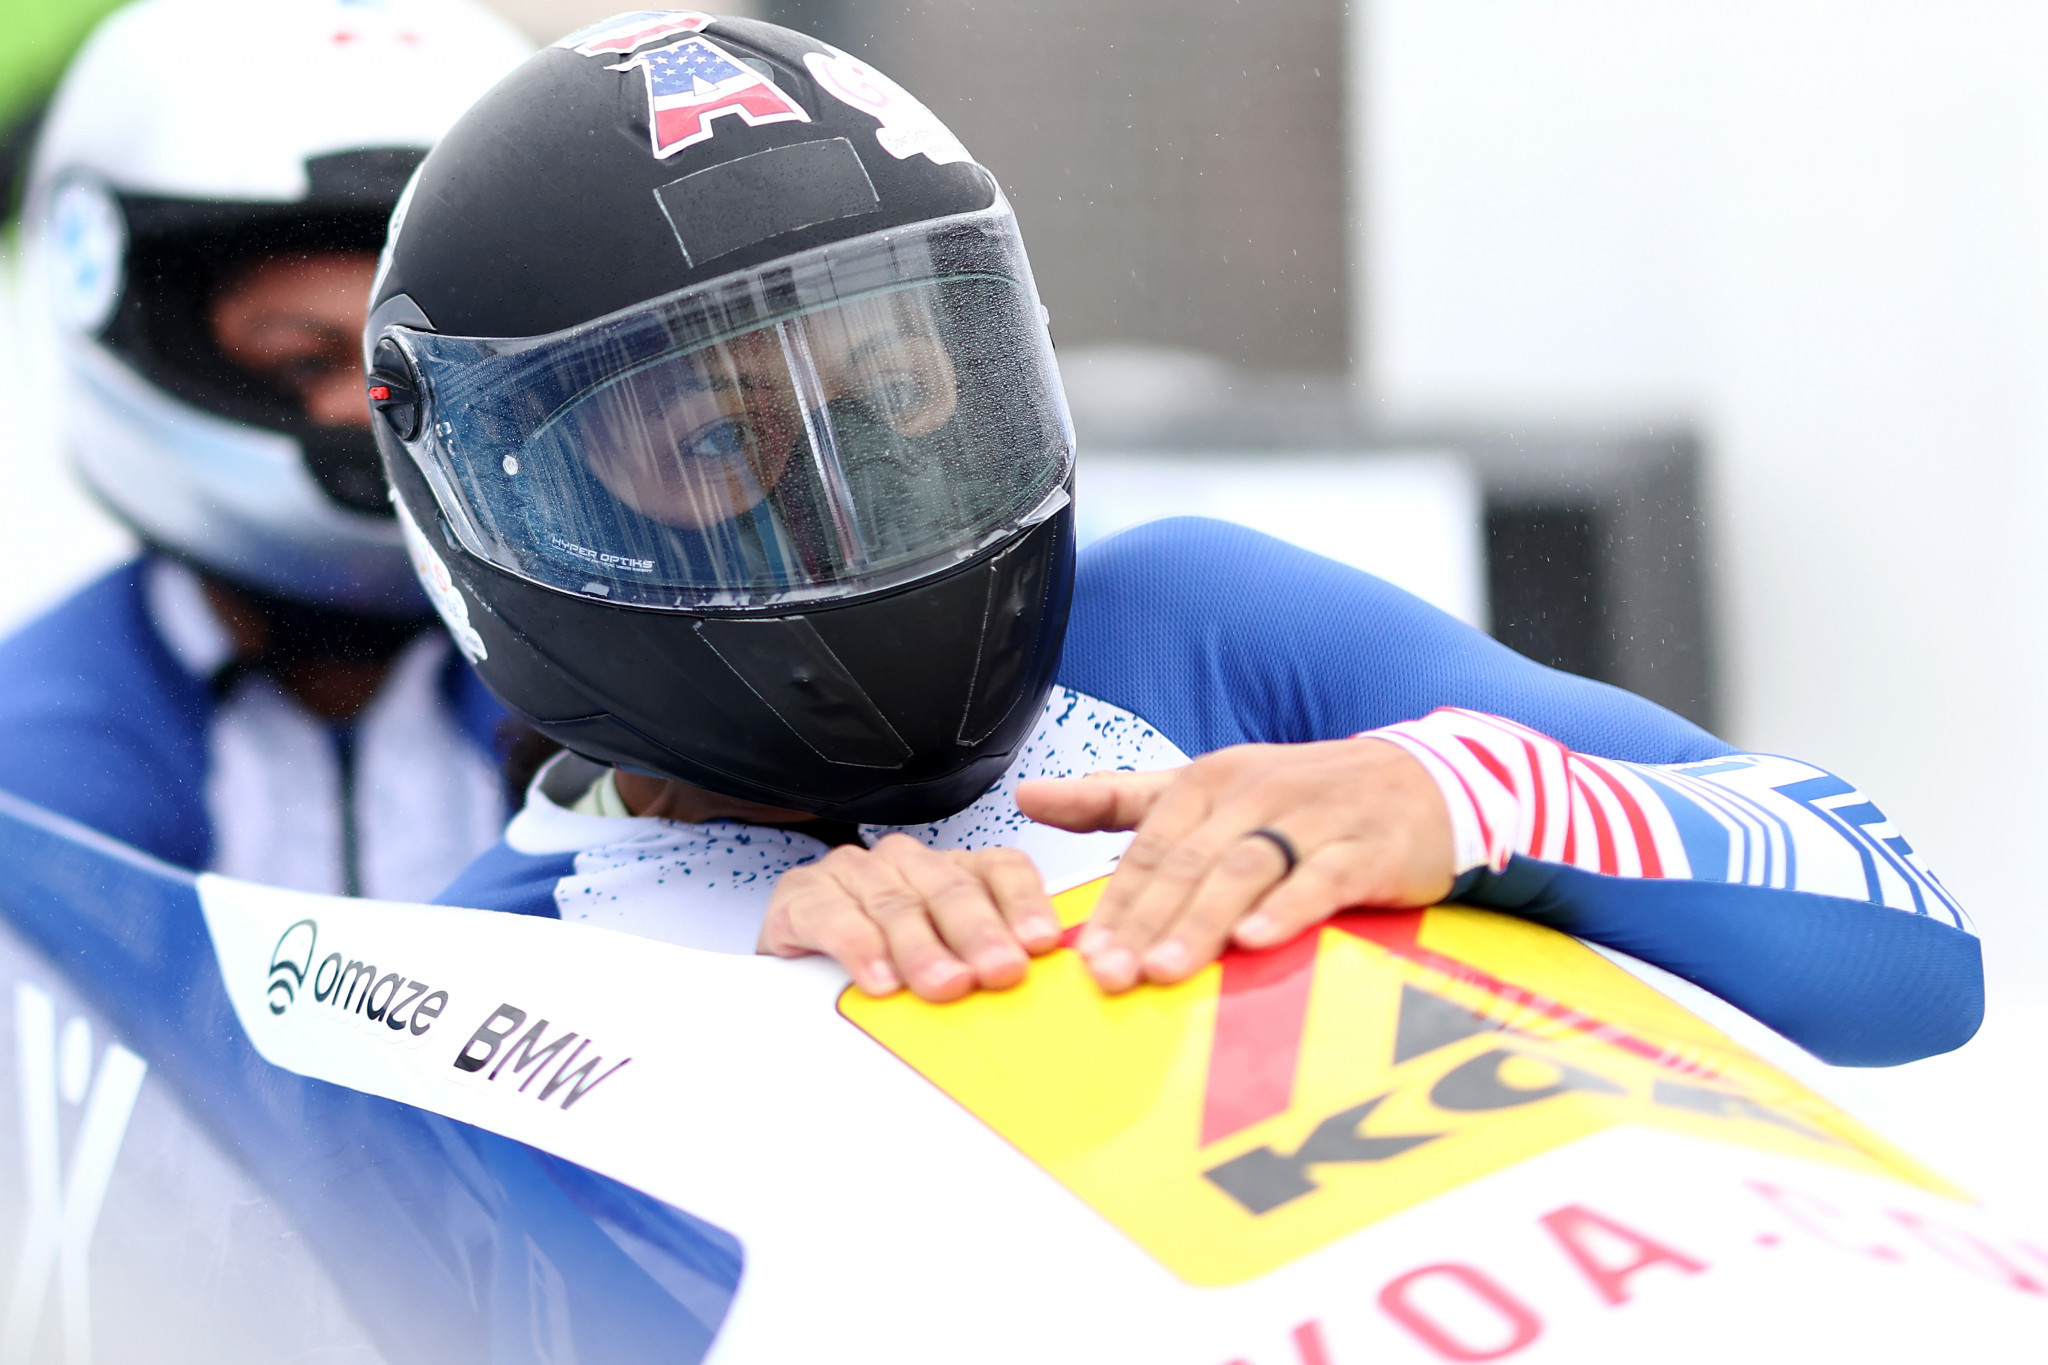 American bobsledder Elana Meyers Taylor, a three-time Olympic medallist, has announced she will be released from isolation at Beijing 2022 in time to compete ©Getty Images